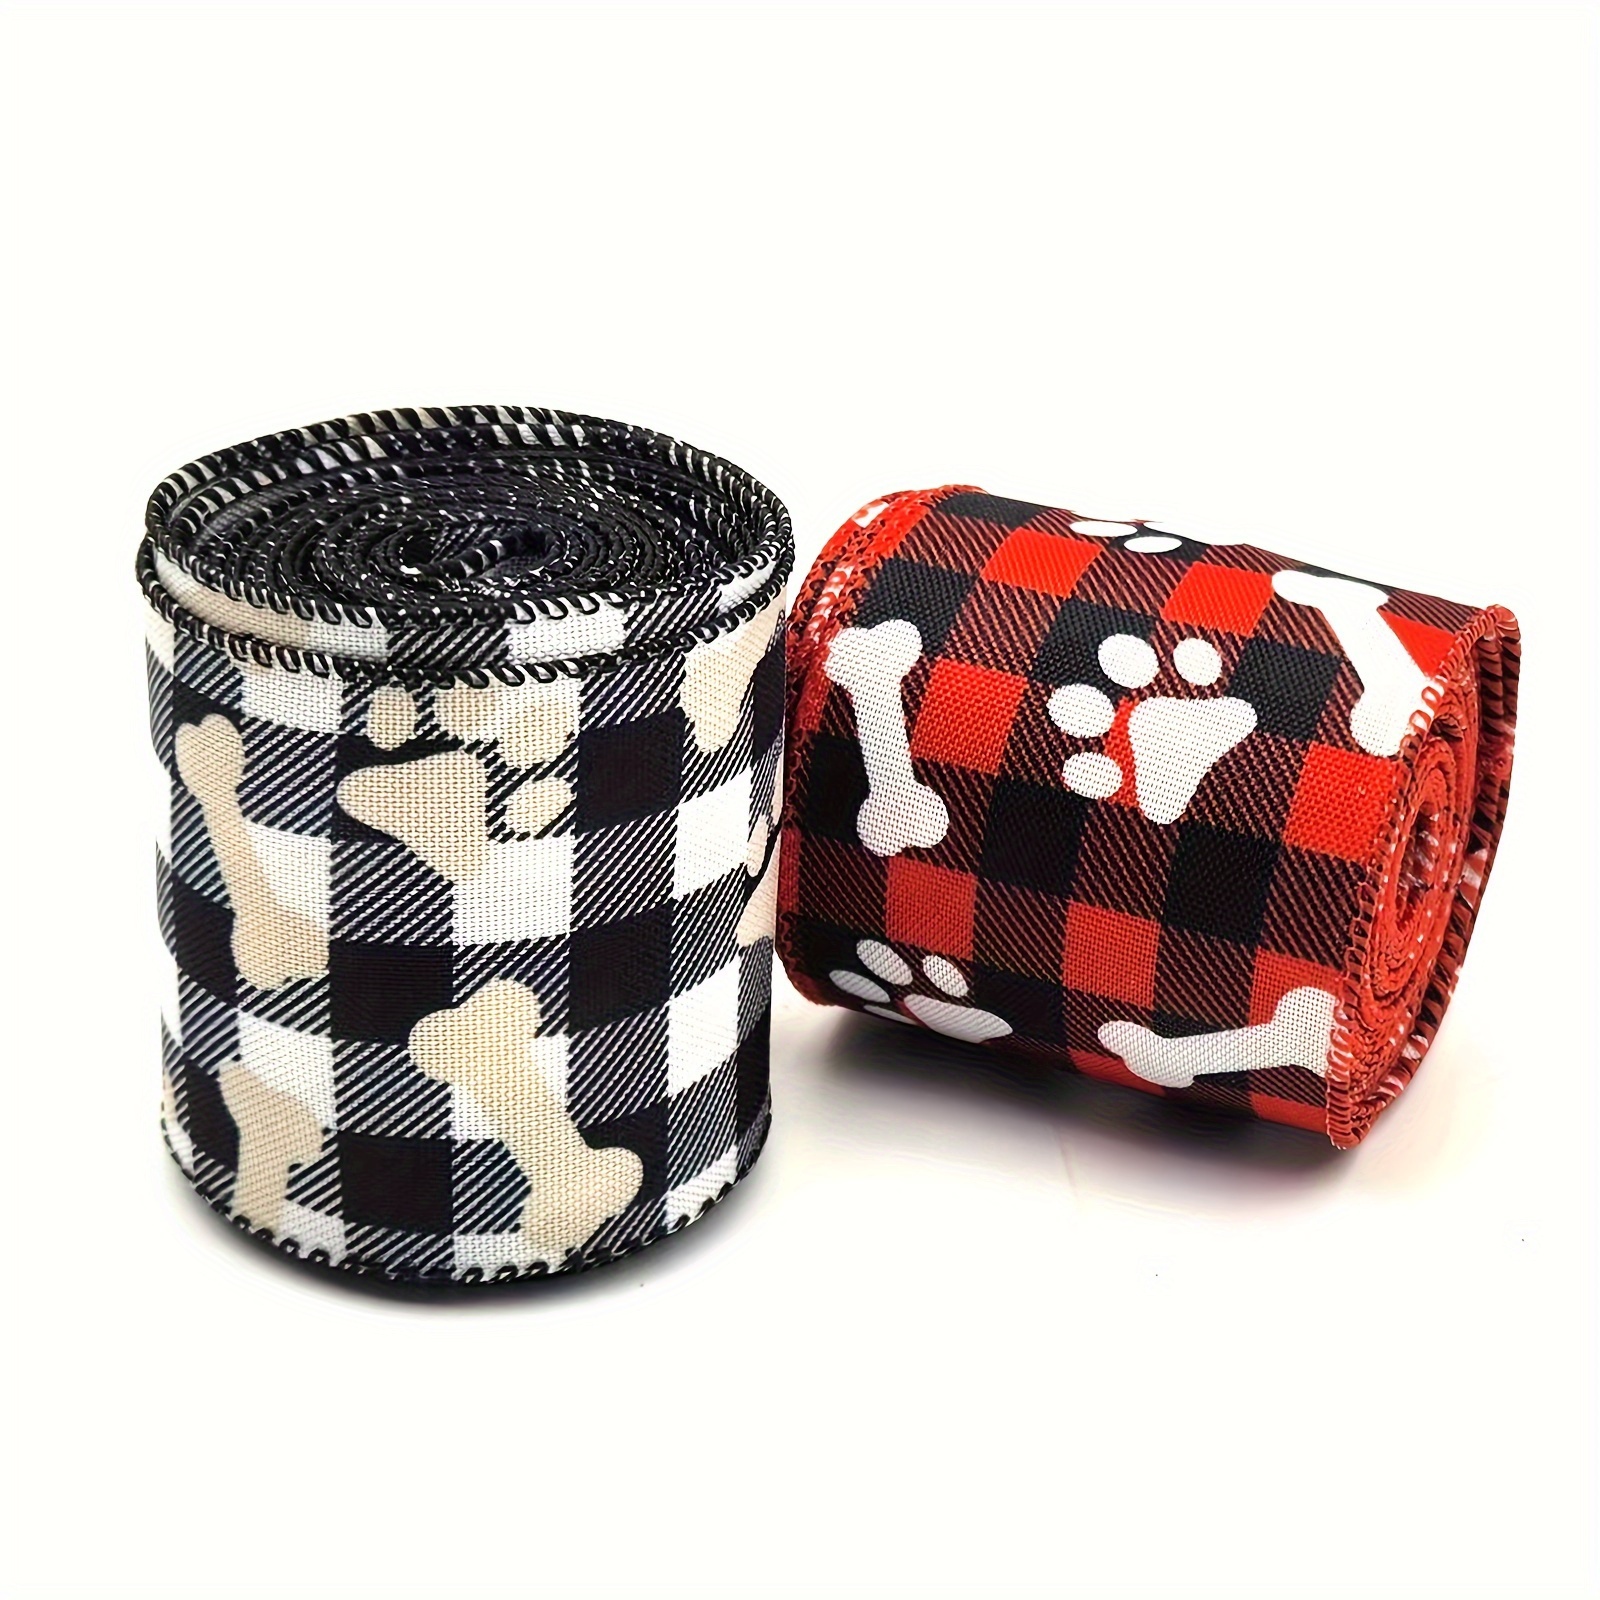 Red Plaid Paw Print Checkered Pattern Wrapping Paper